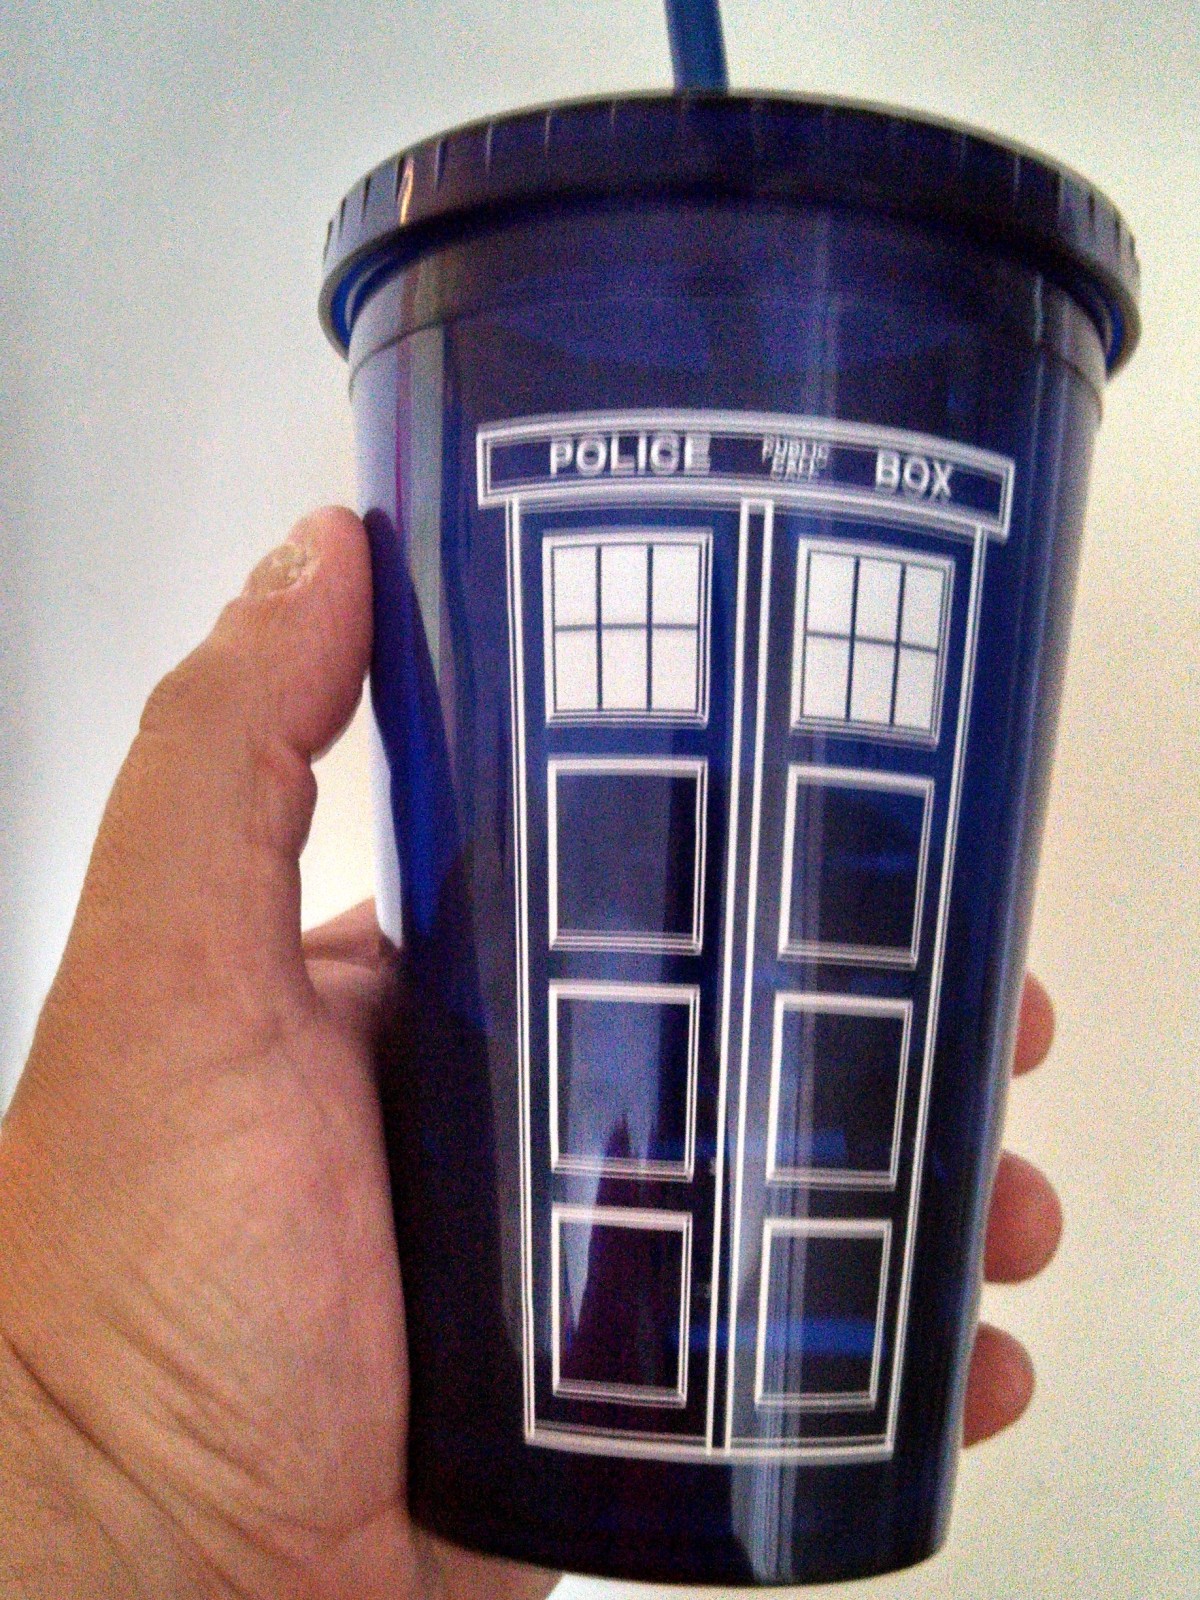 Unfortunately, it's not bigger on the inside. #Whovians